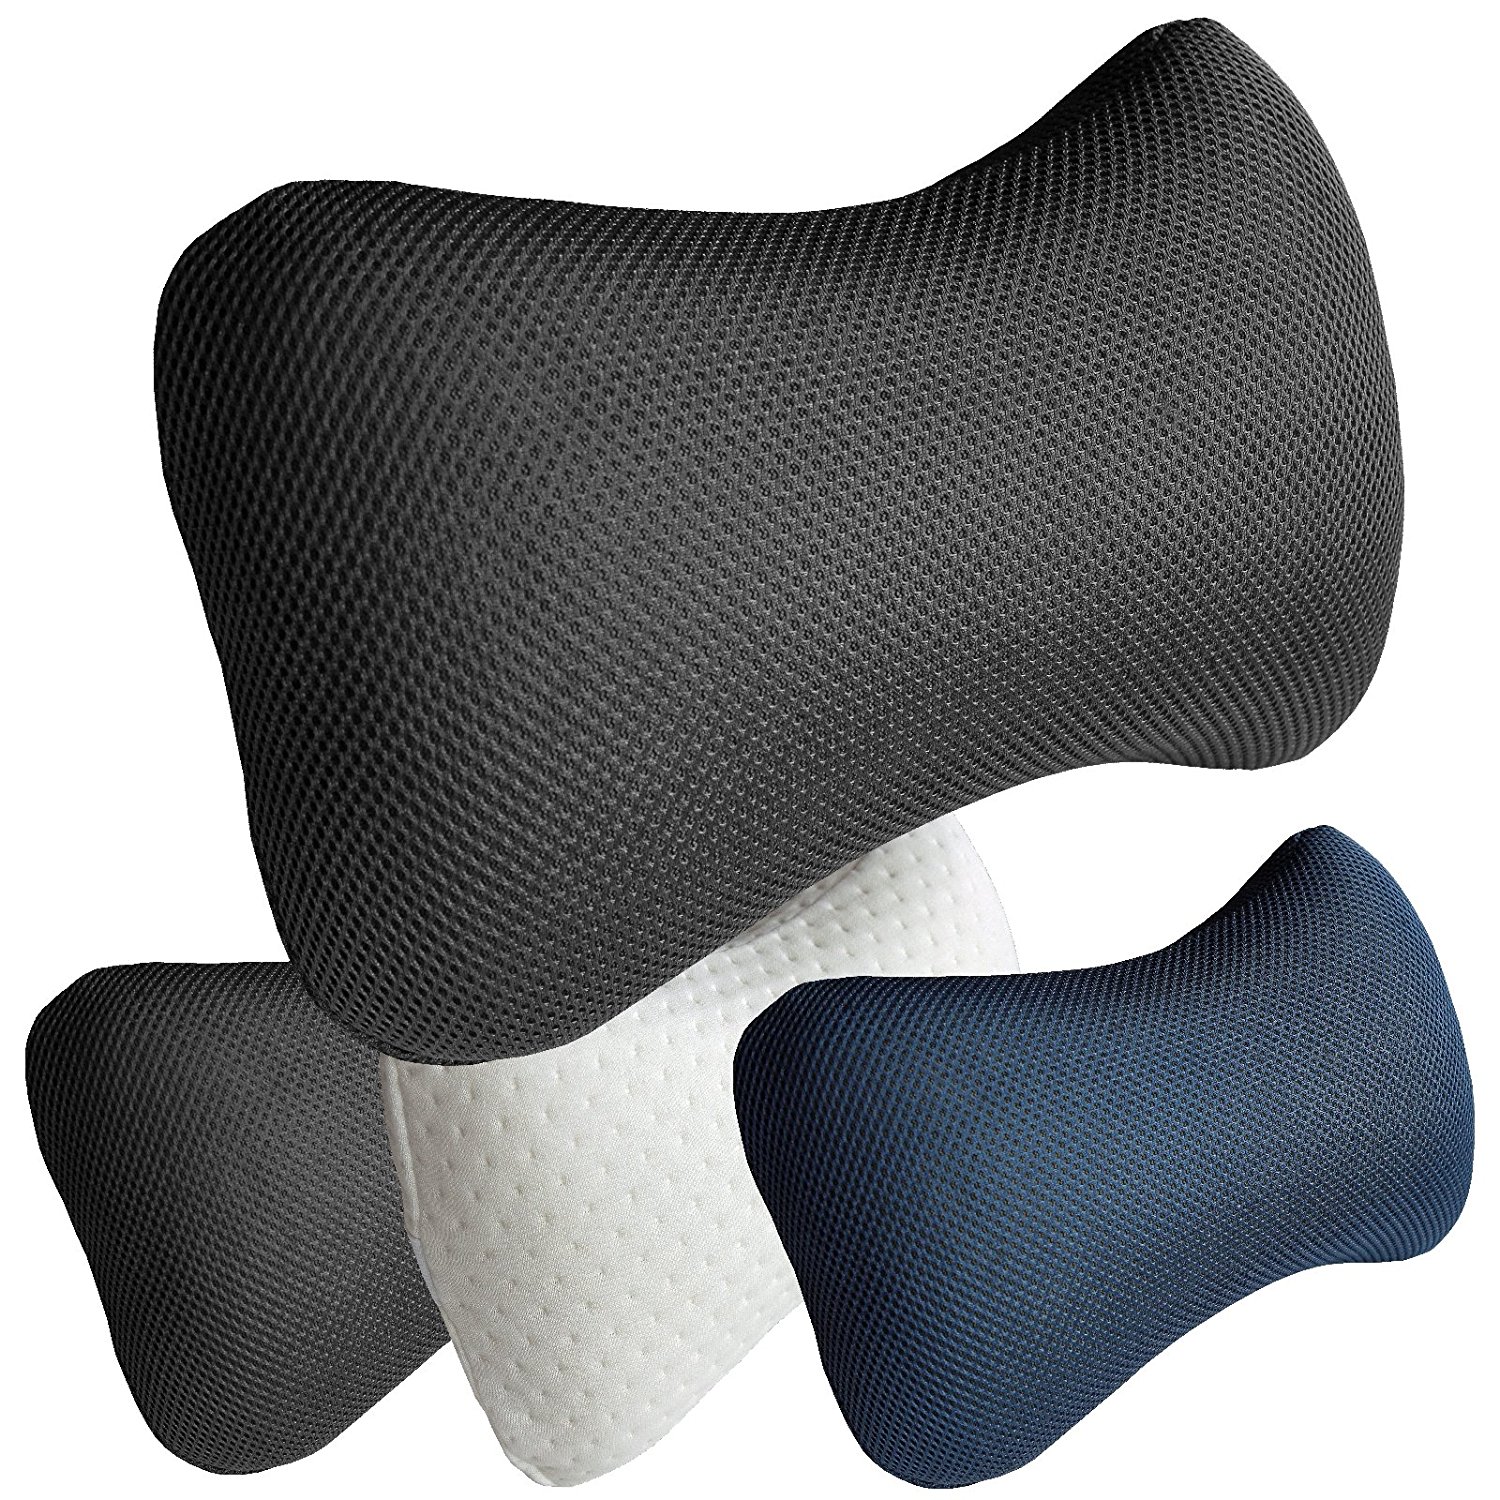 Review of Purefly Travel Pillow Luxuriously Soft Inflatable Neck Pillow Support